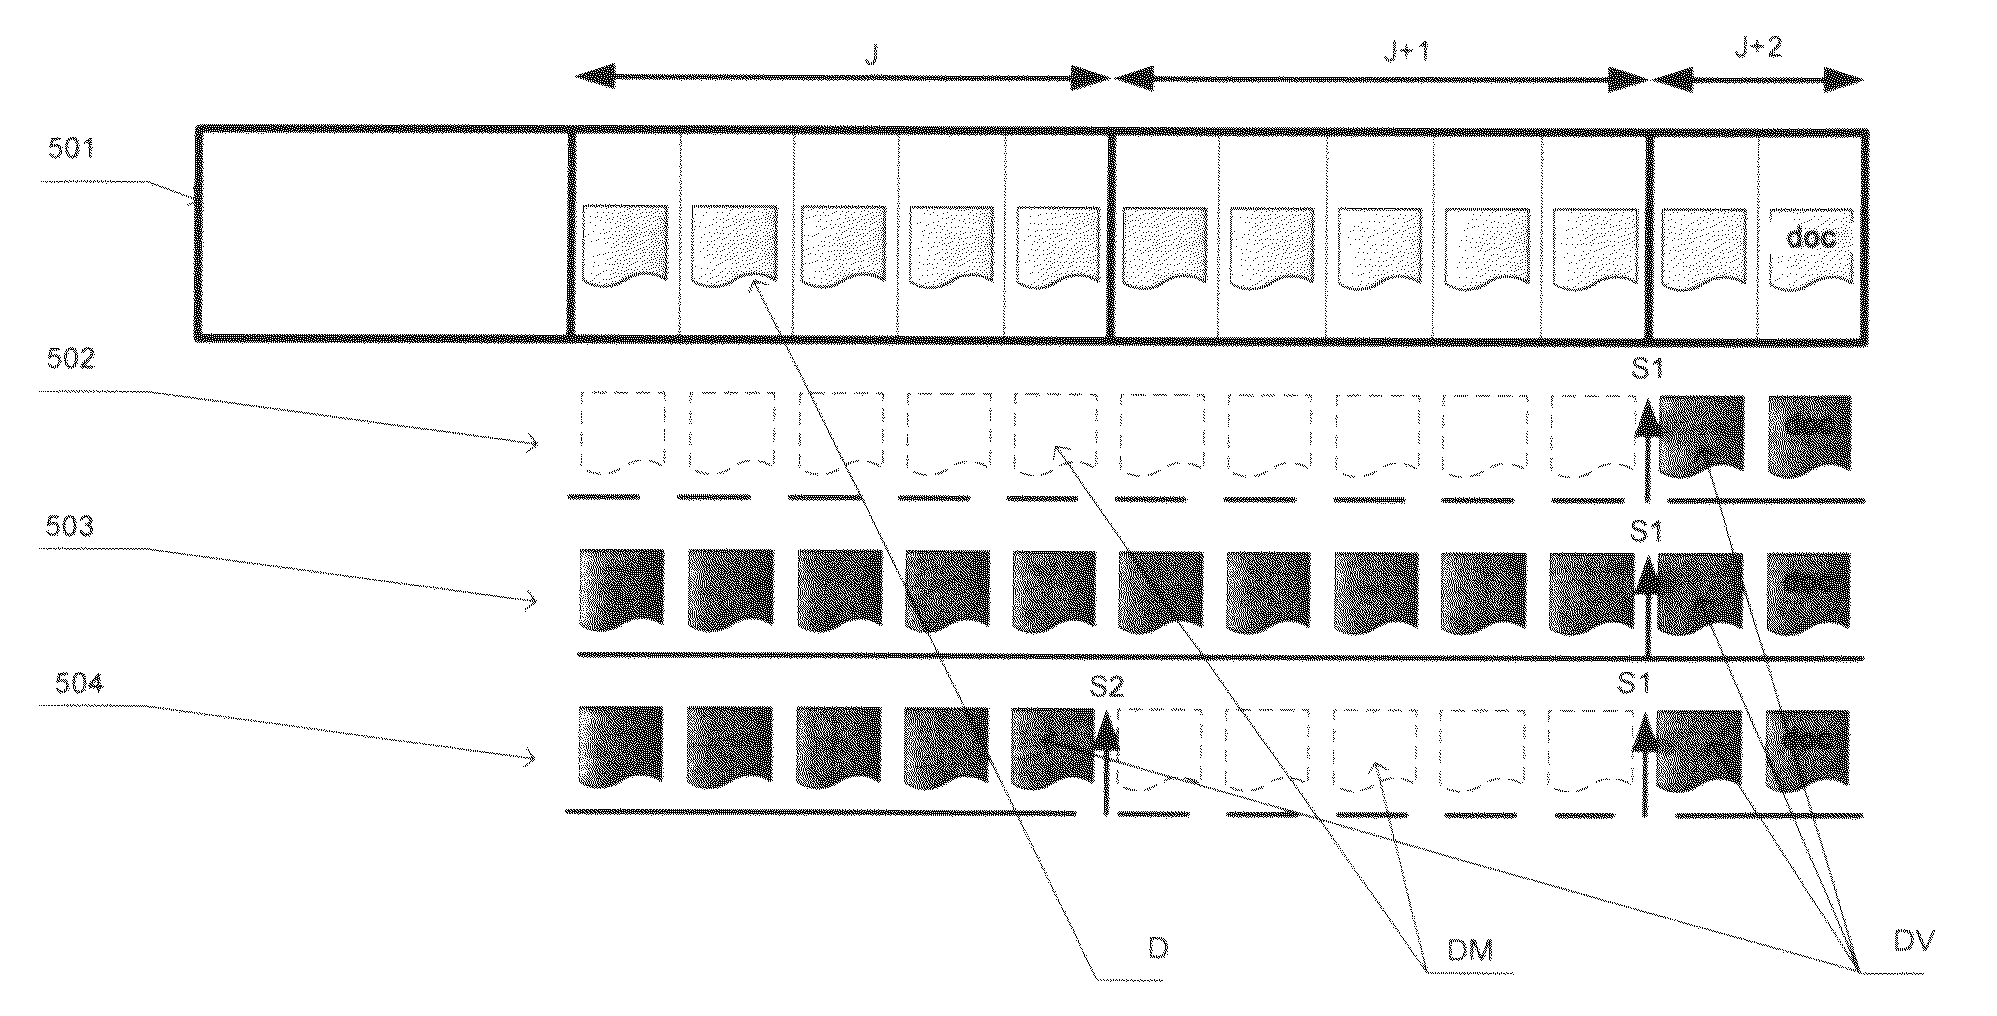 Display device and method aiming to protect access to audiovisual documents recorded in storage means